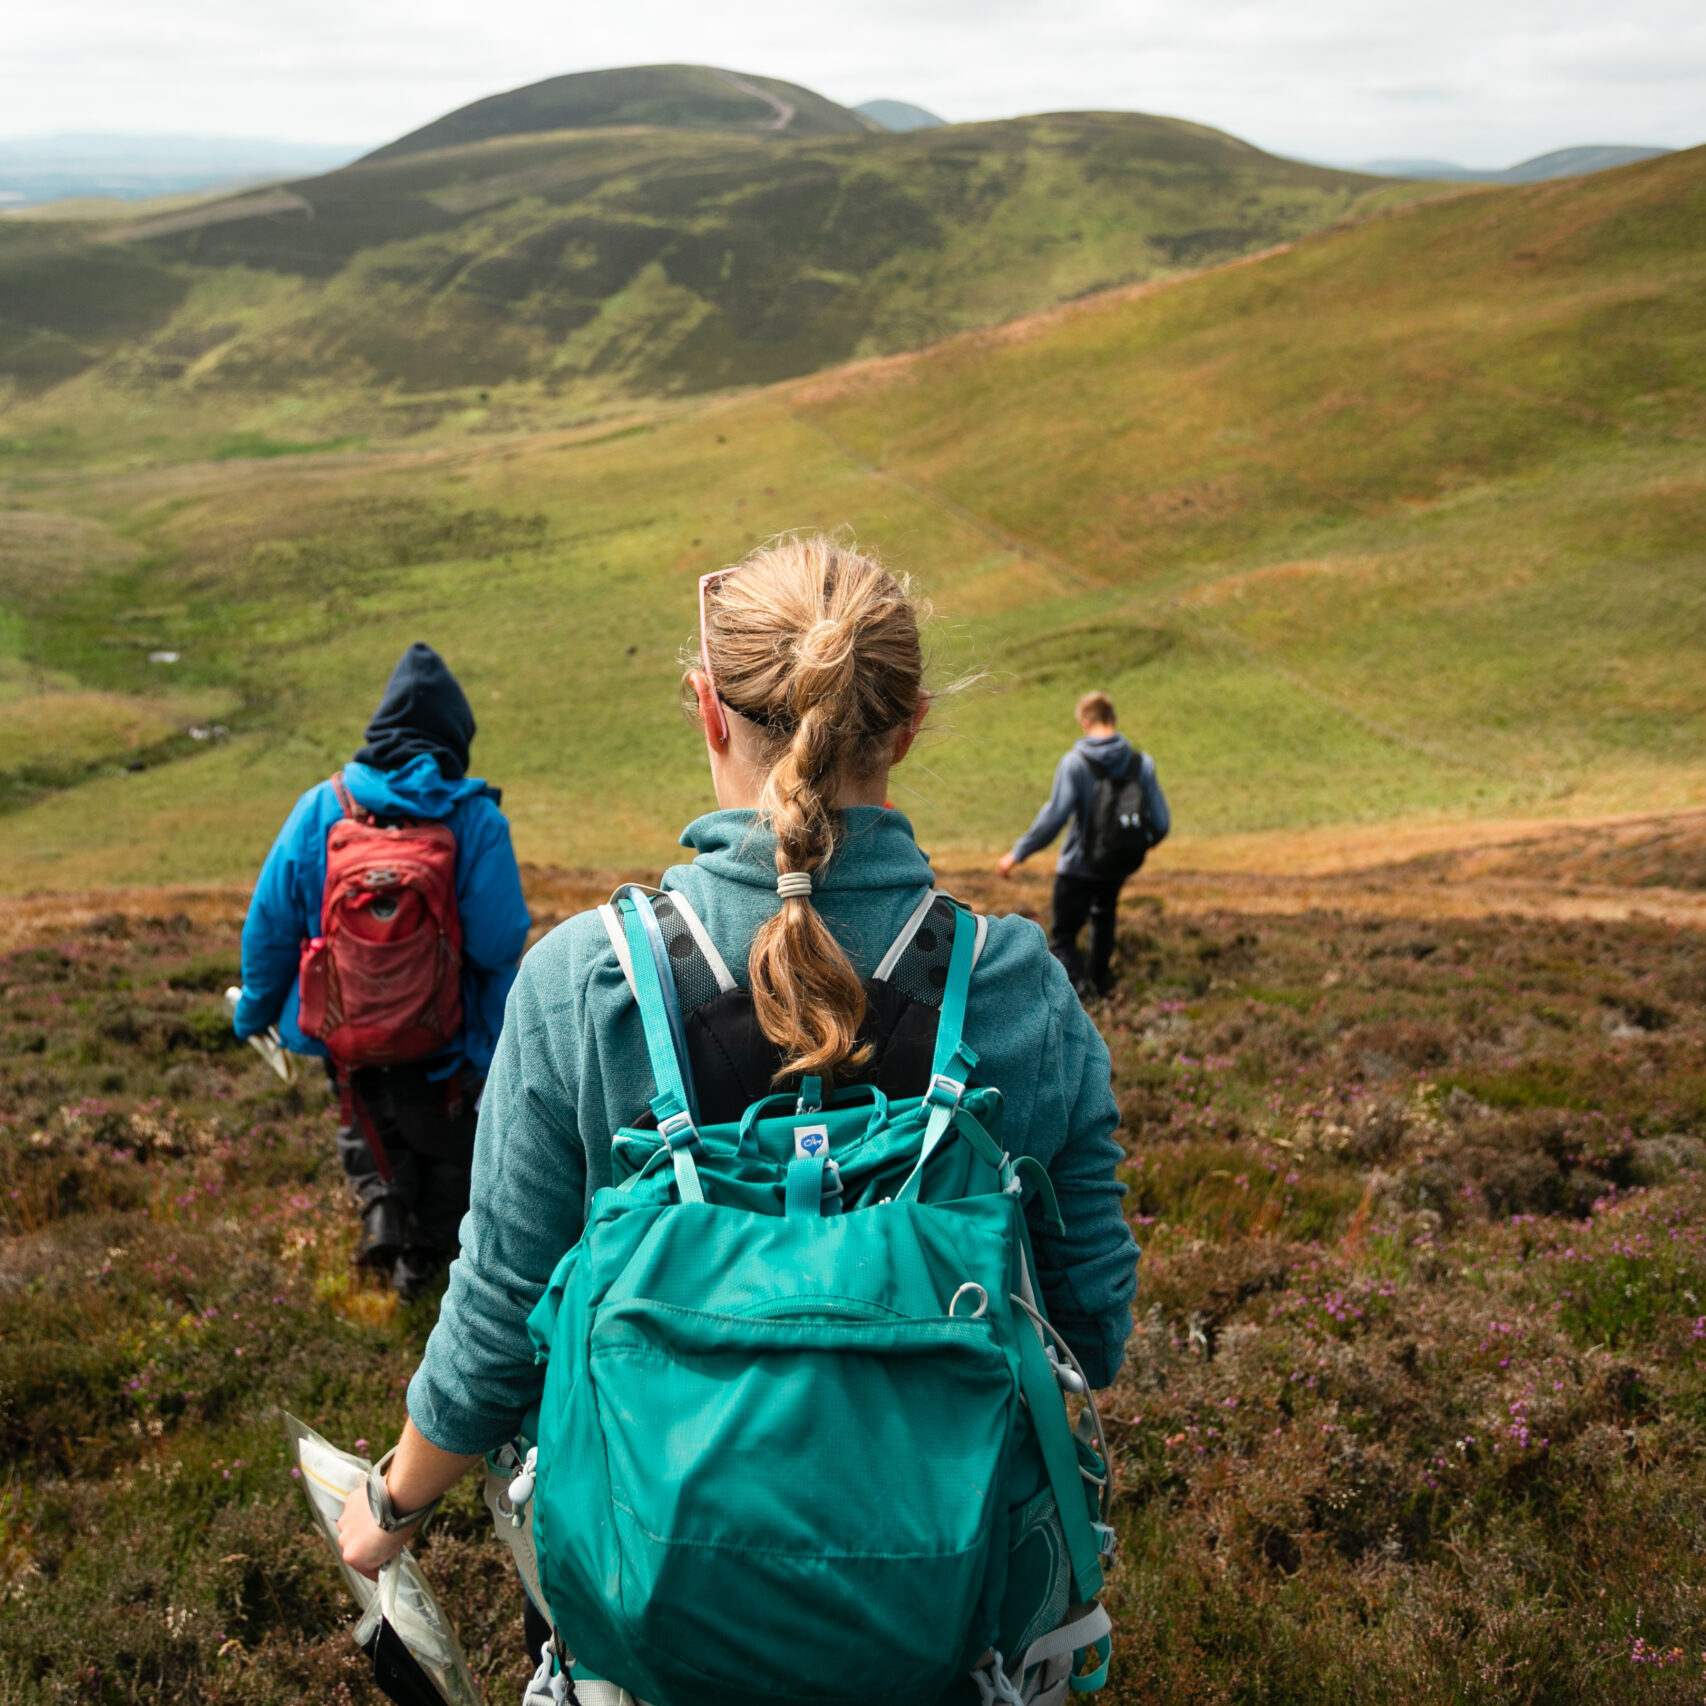 A group of people walking in the Scottish hills